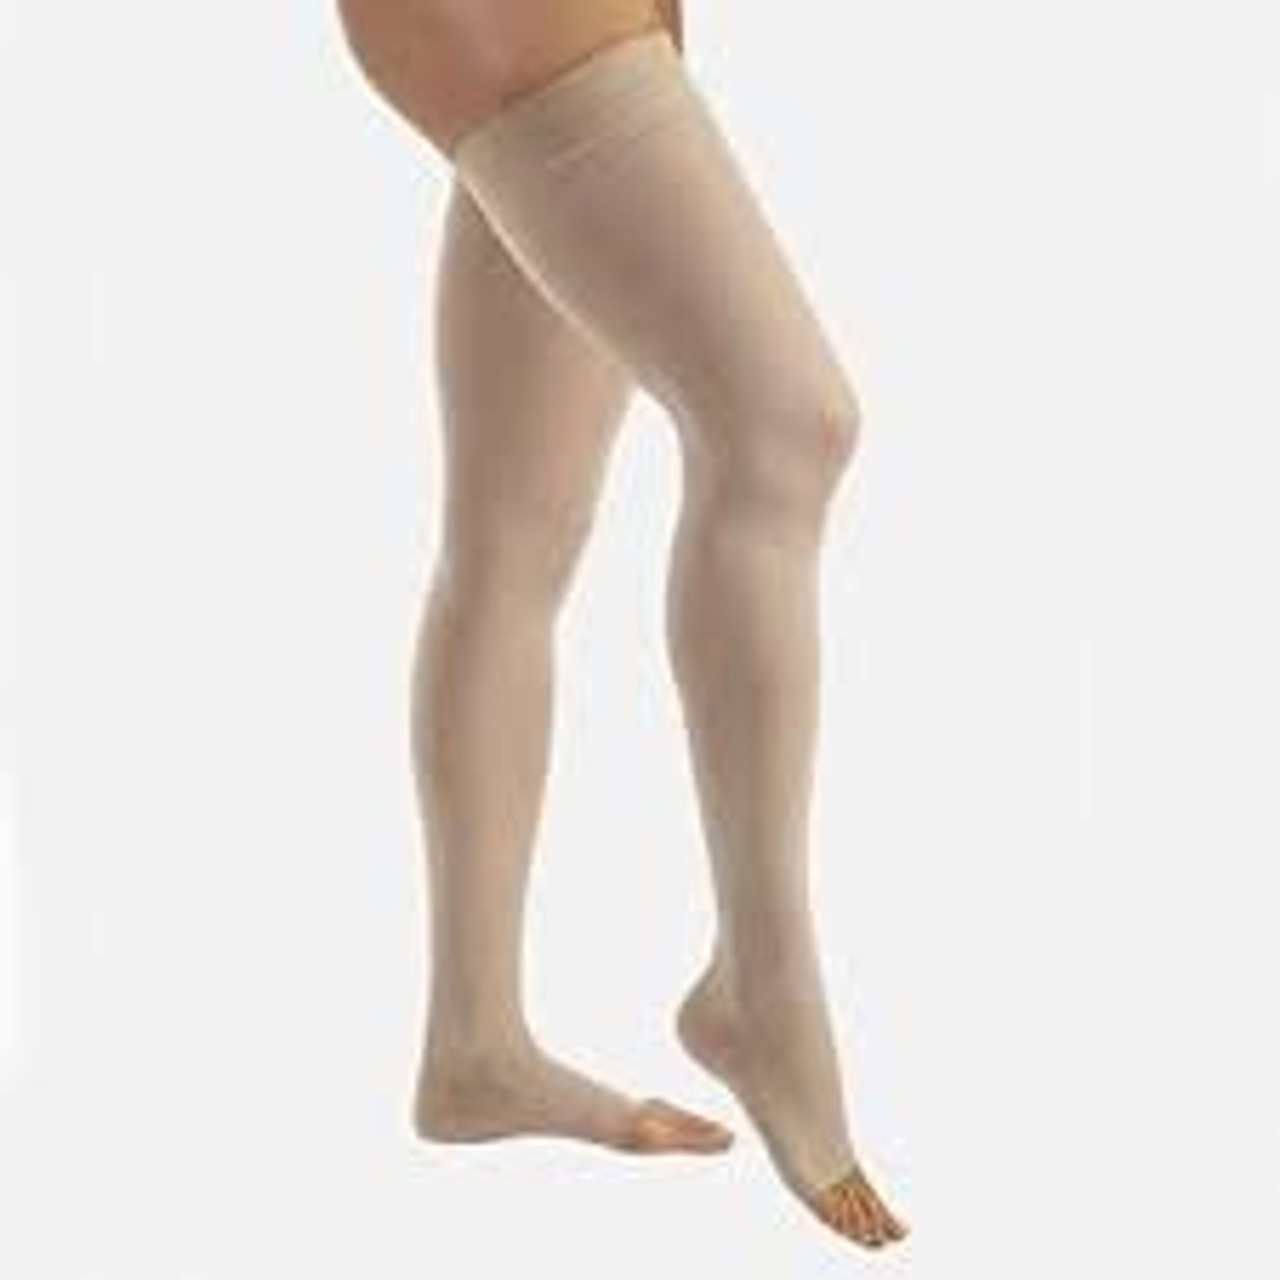 BSN-7769020 PR/1 JOBST SENSITIVE THIGH HIGH PETITE COMPRESSION STOCKING, SMALL, 20-30 MMHG, OPAQUE NATURAL, CLOSED TOE